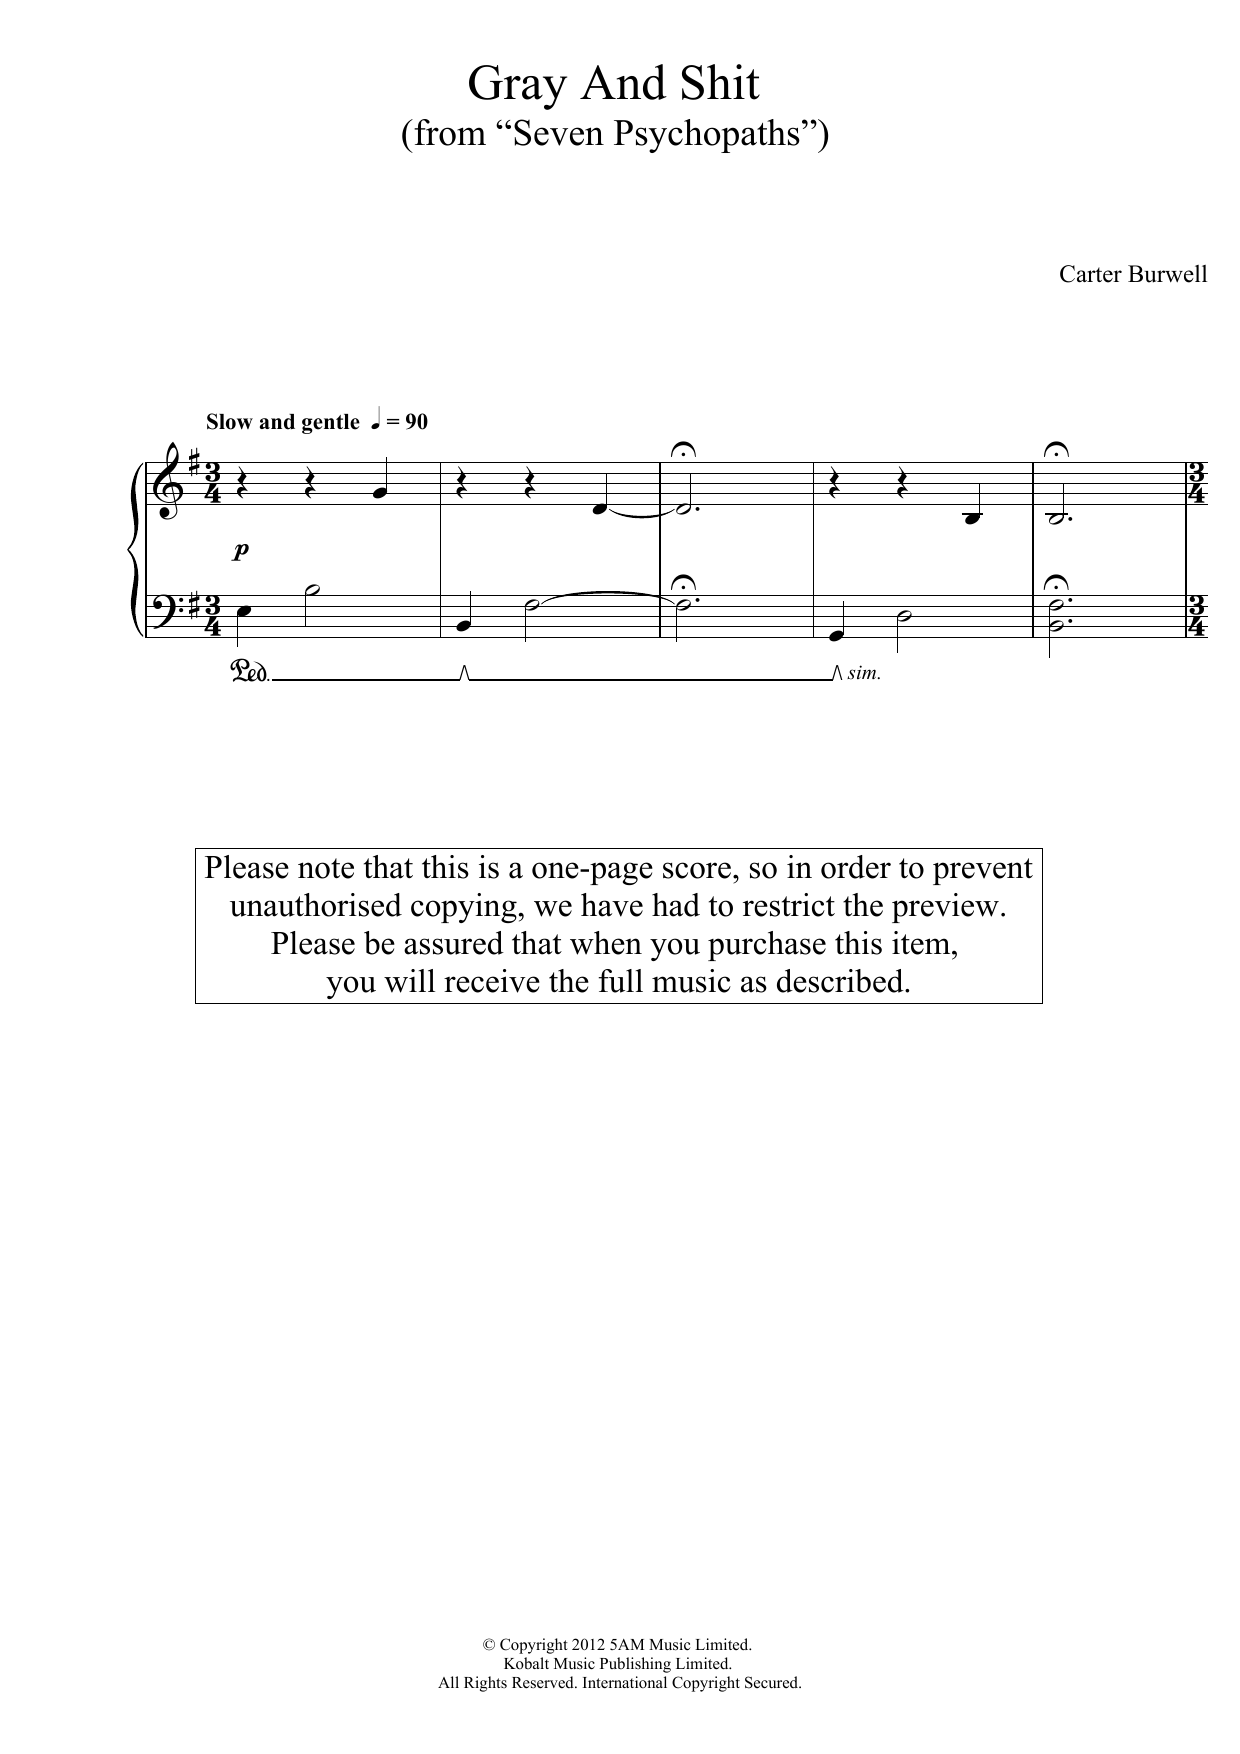 Gray And Shit (From Seven Psychopaths) sheet music